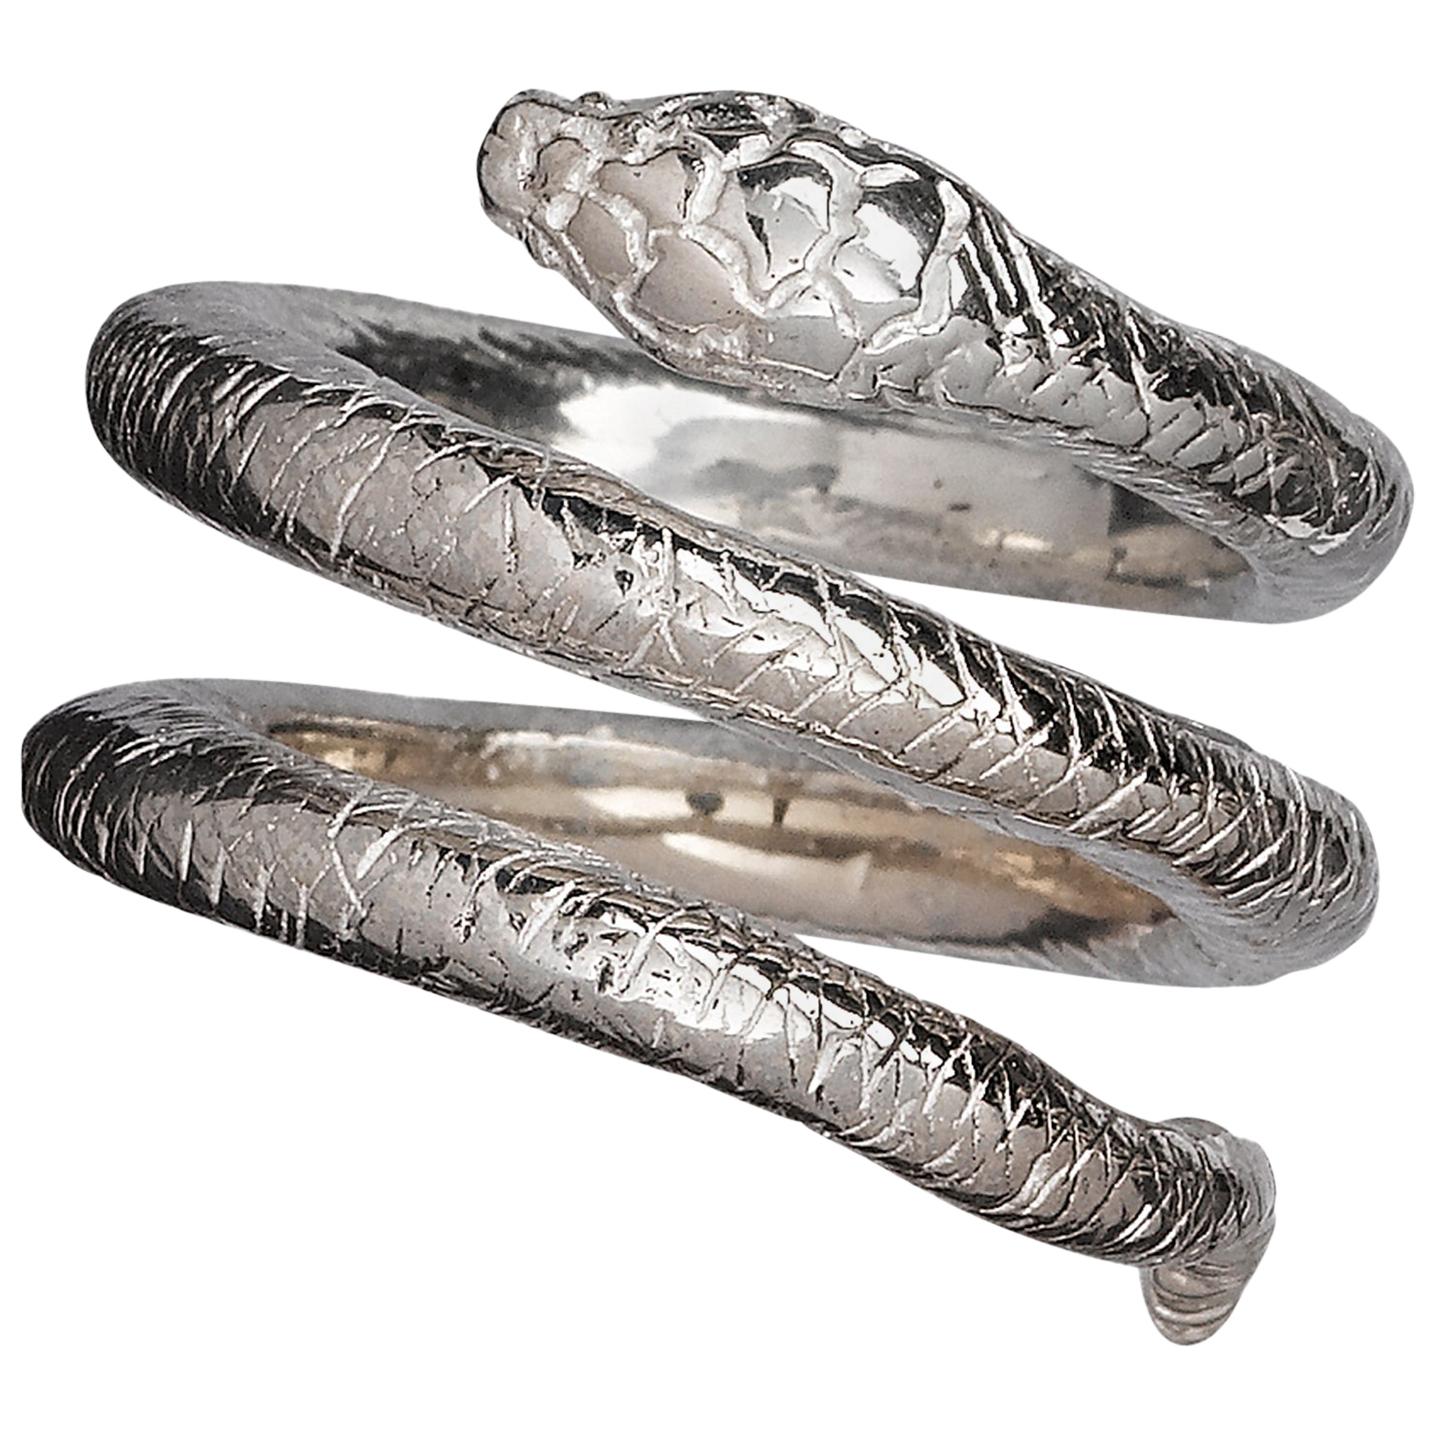 The Egyptian Wadjet Coiled Snake Ring in Sterling Silver